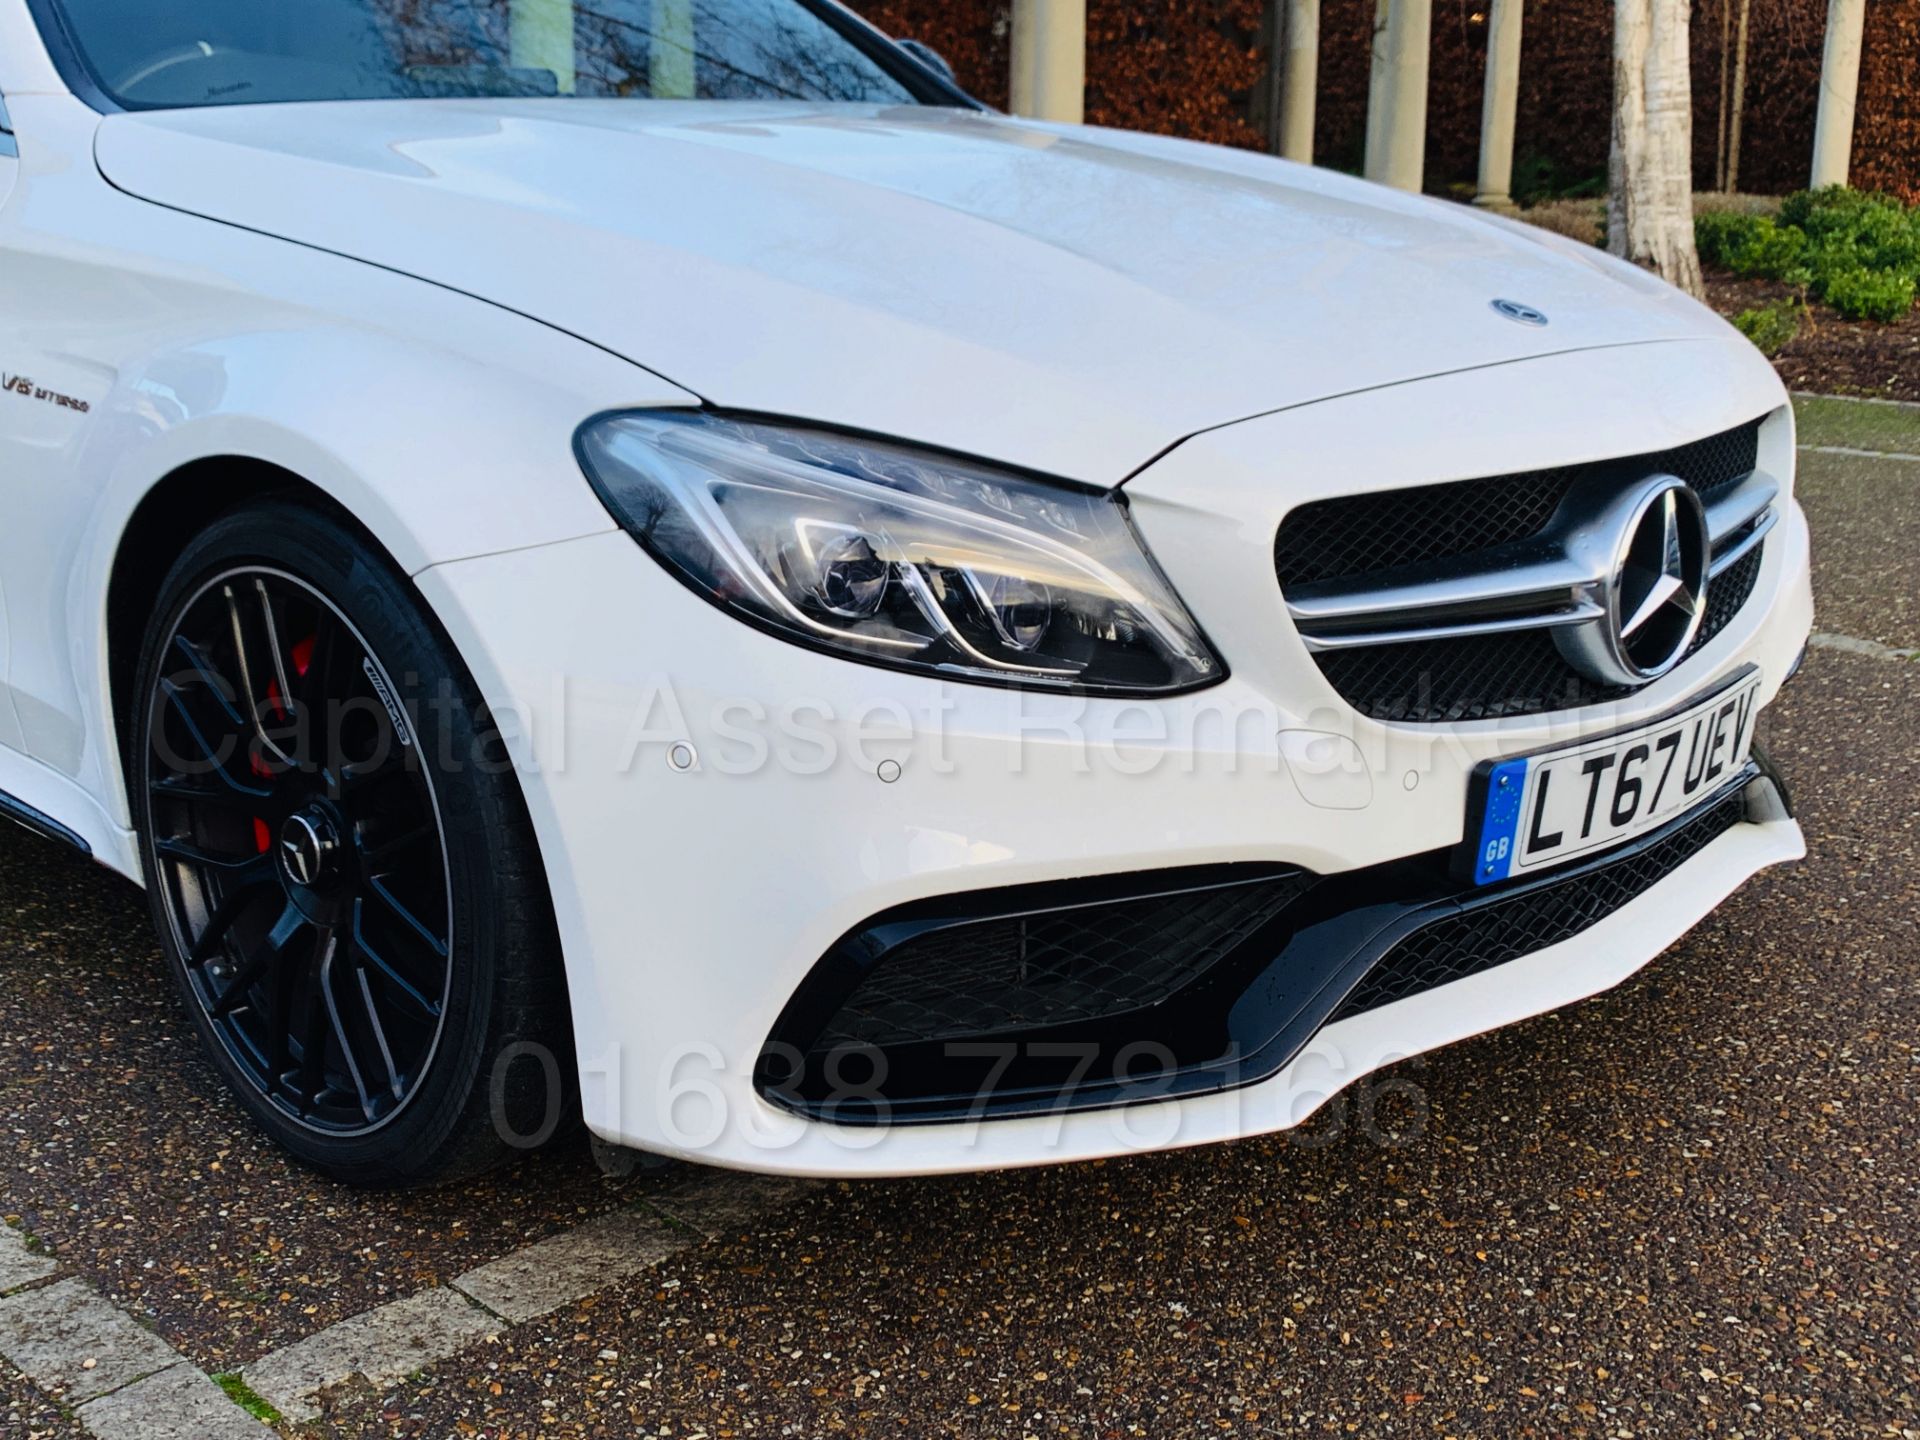 (On Sale) MERCEDES-BENZ AMG C63-S *CABRIOLET* (67 REG) '4.0 BI-TURBO -510 BHP - AUTO' *FULLY LOADED* - Image 25 of 79